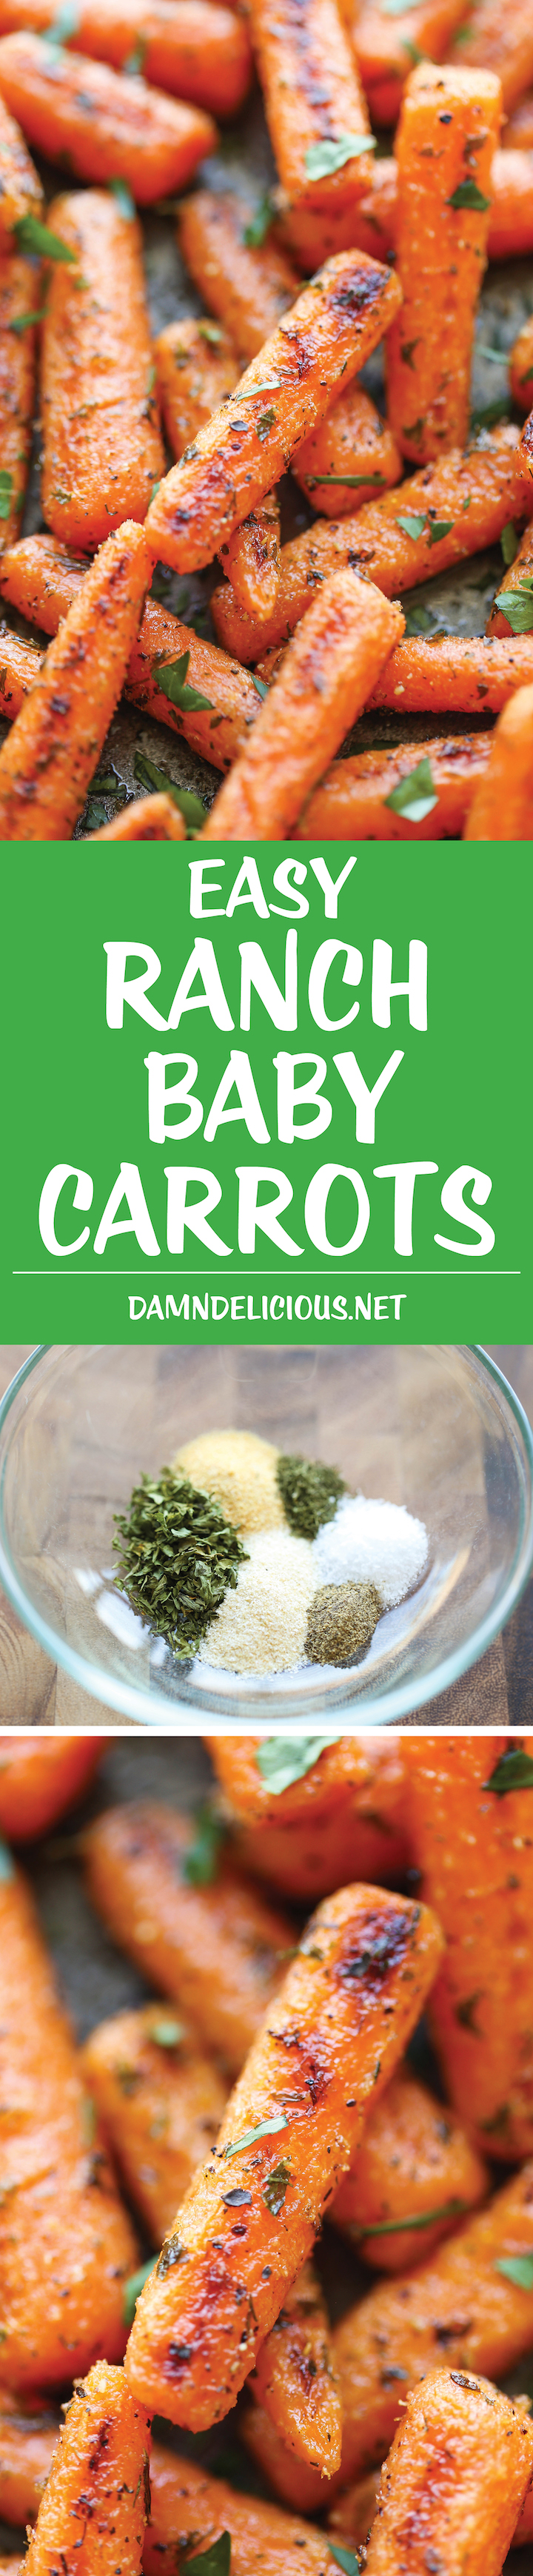 Easy Ranch Baby Carrots - Made with homemade Ranch seasoning and roasted to crisp-tender perfection. And all you need is 5 min prep and one pan. How easy!